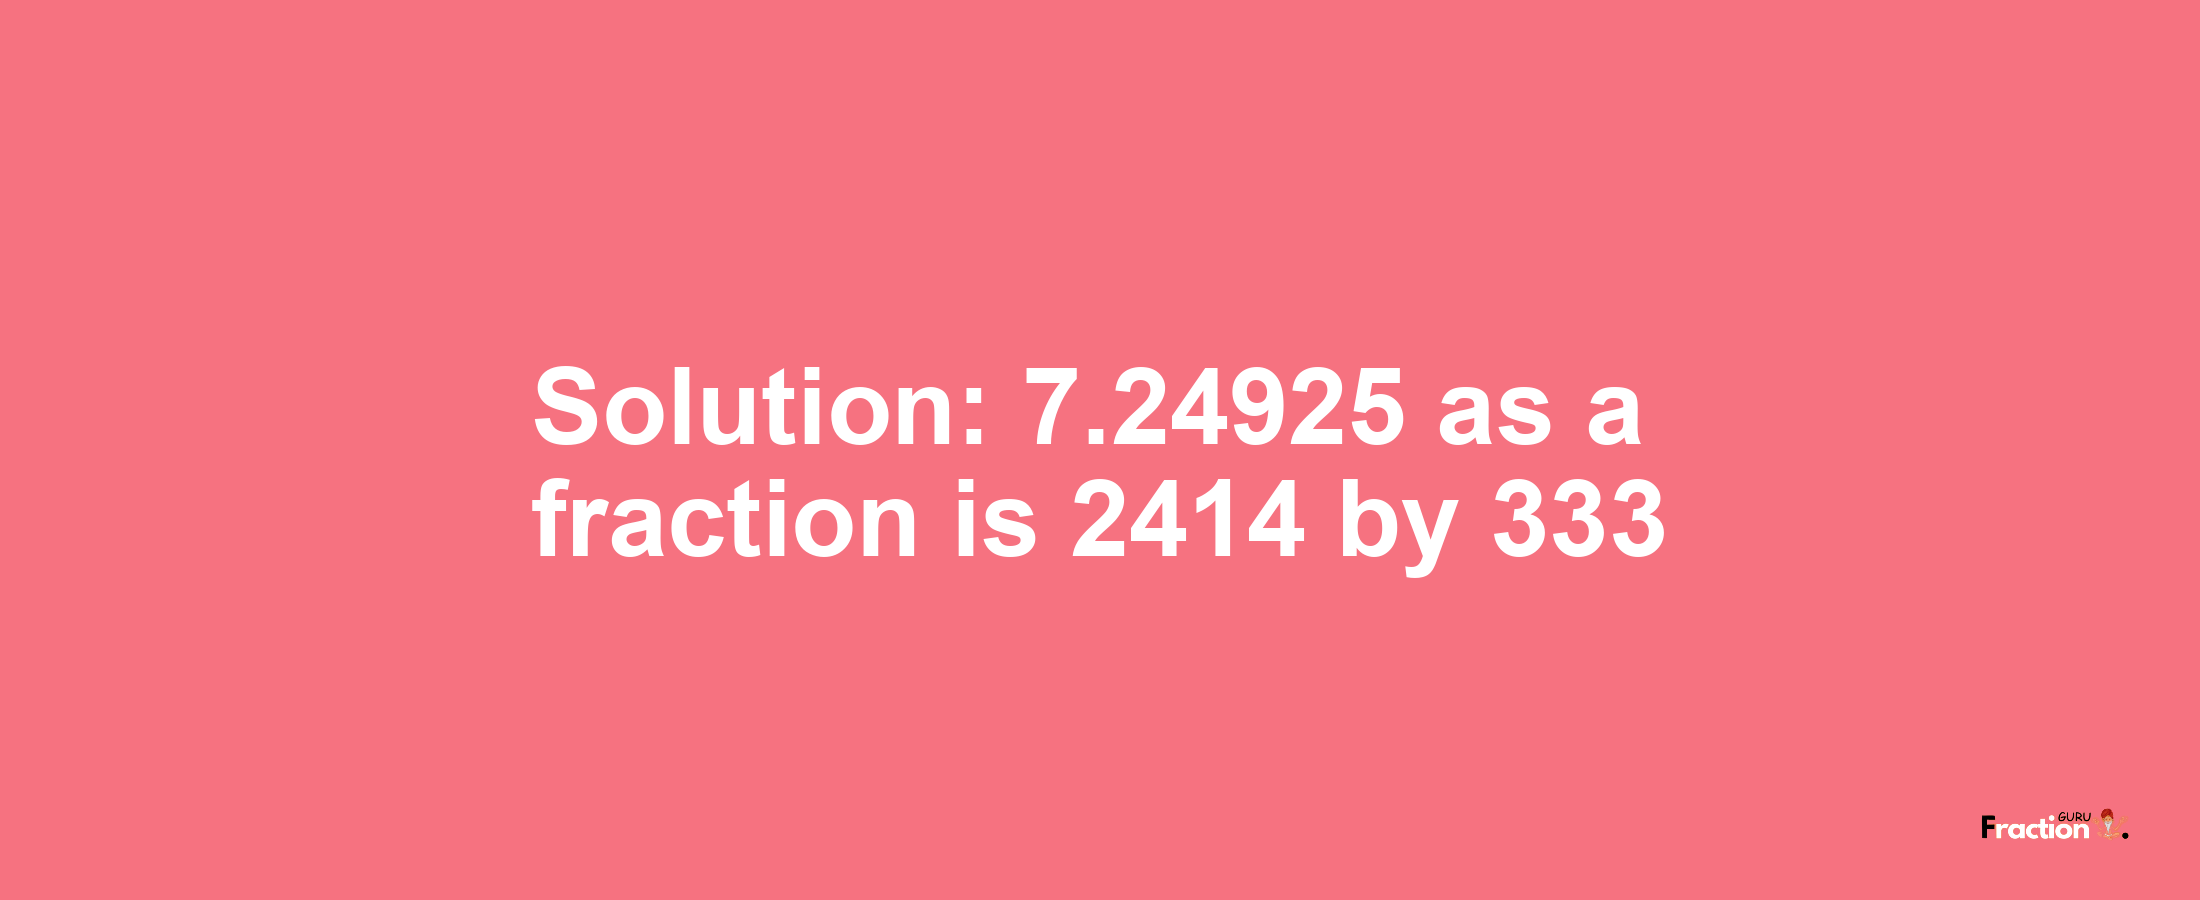 Solution:7.24925 as a fraction is 2414/333